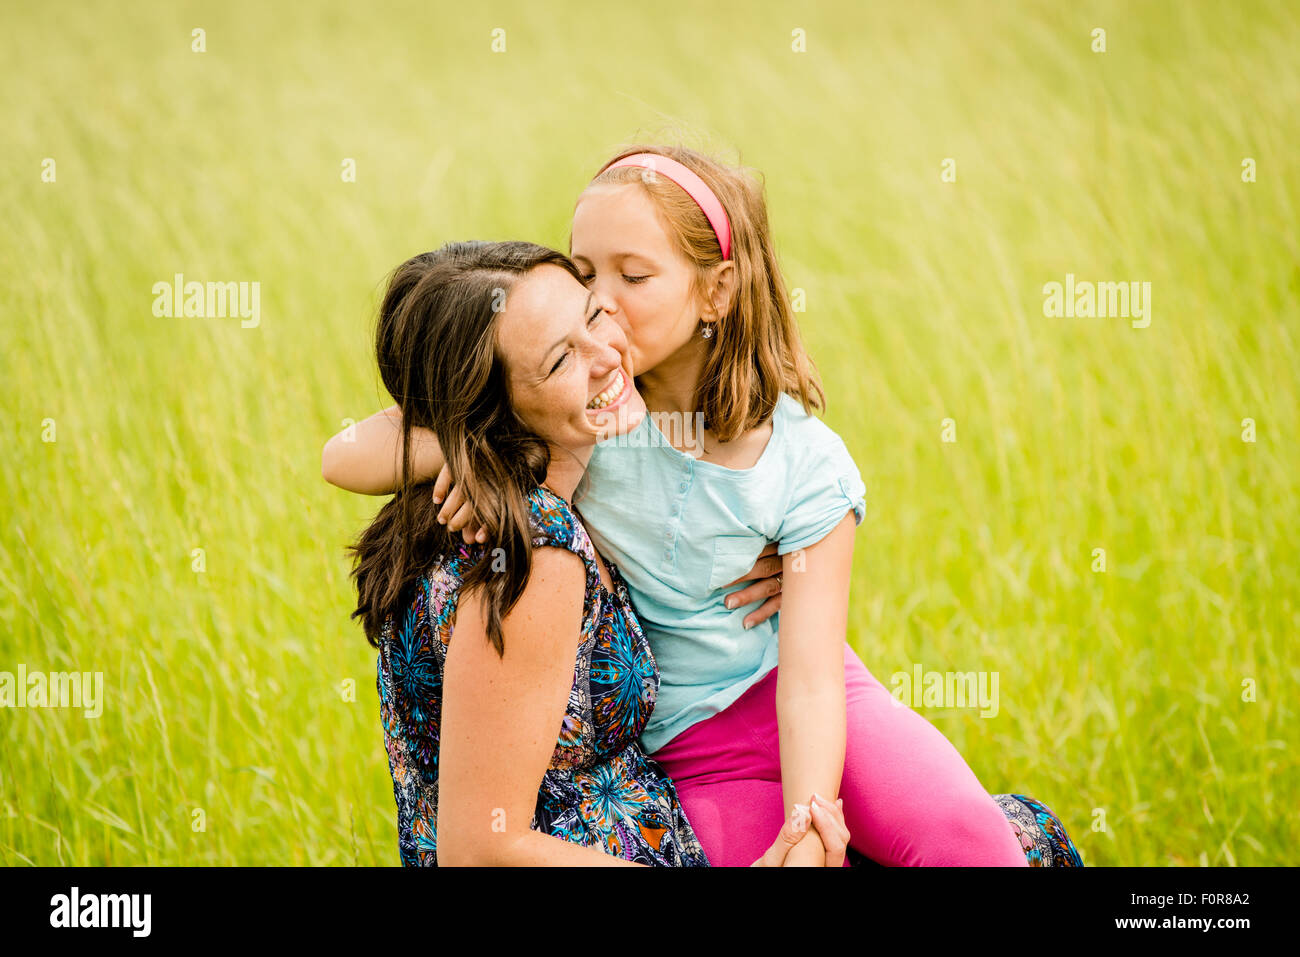 Mother and child are hugging and having fun outdoor in nature Stock Photo